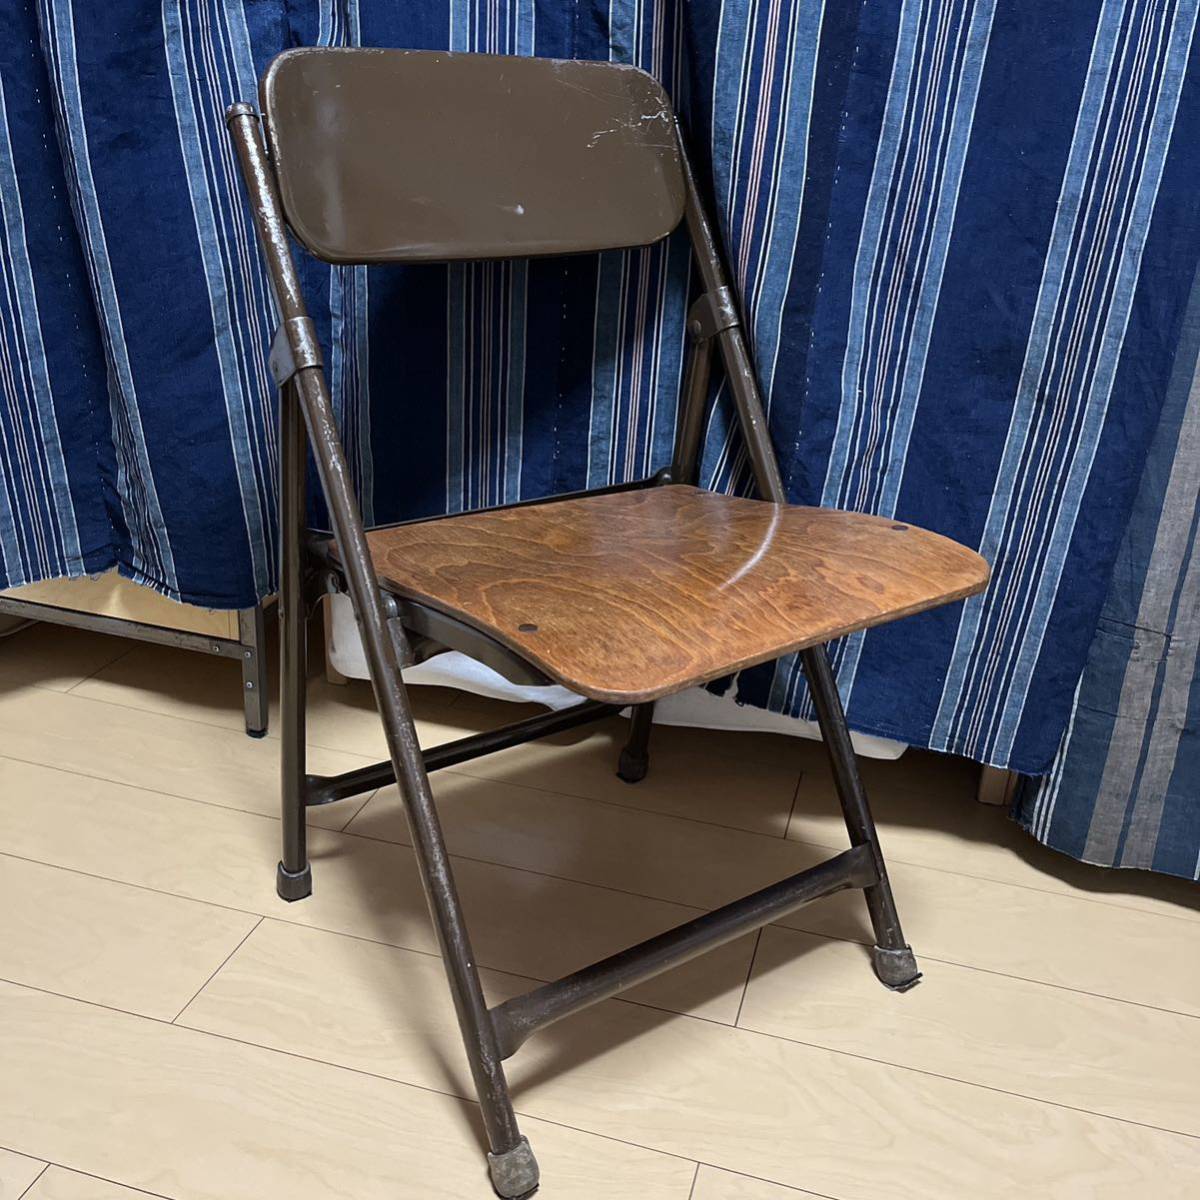 40s the norcor folding chair norcor manufacturing company 40年代 アメリカ製 フォウルディング チェア 折りたたみ椅子 パイプ椅子